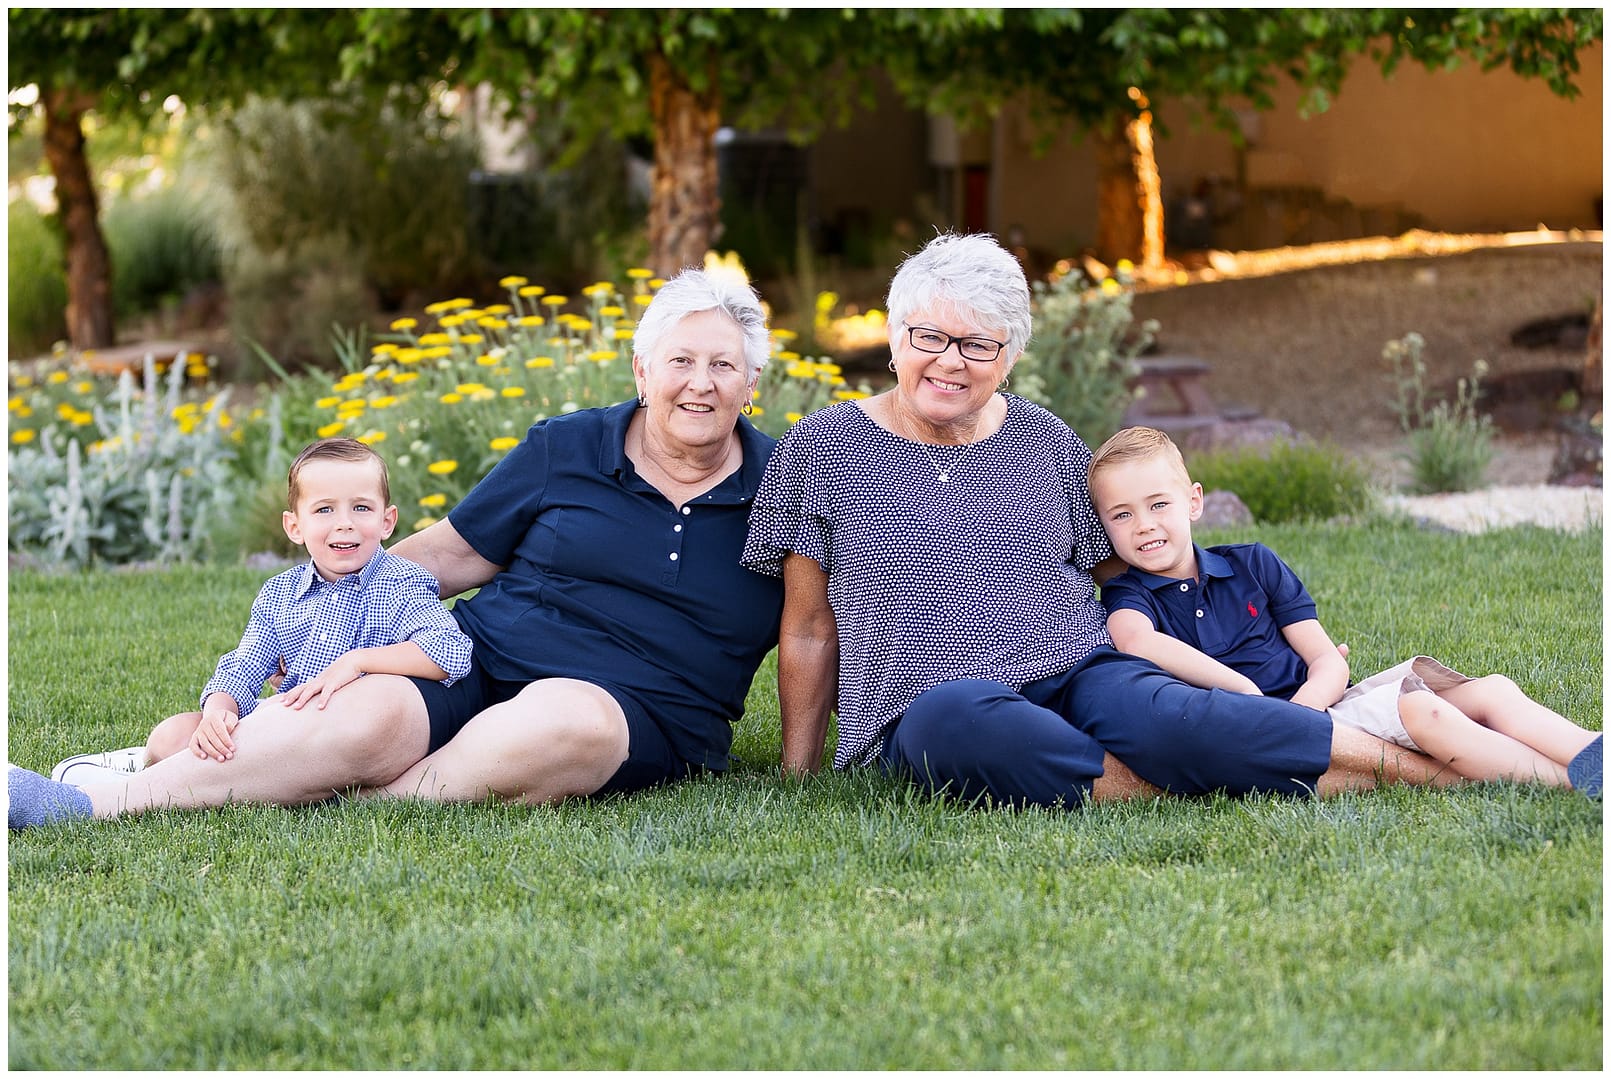 Grandparents pose on grass during Boise grandparent session. Photo by Tiffany Hix Photography.